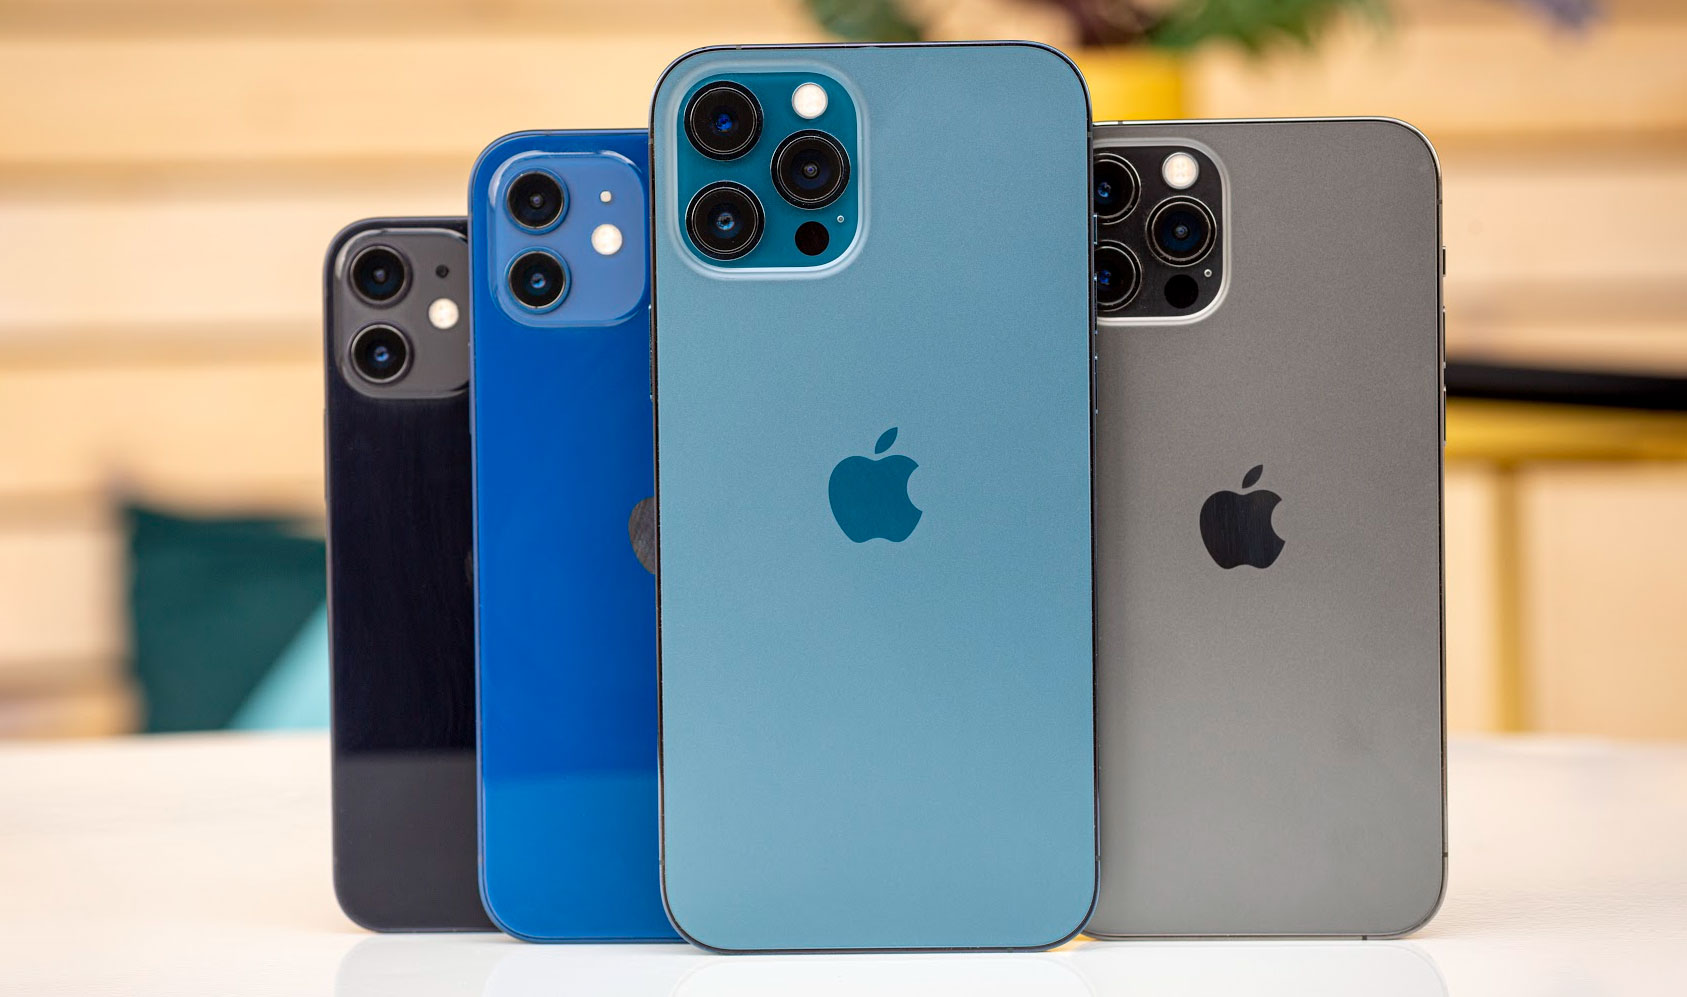 Apple’s iPhone 12 Pro Max and iPhone 11 were top sellers last quarter